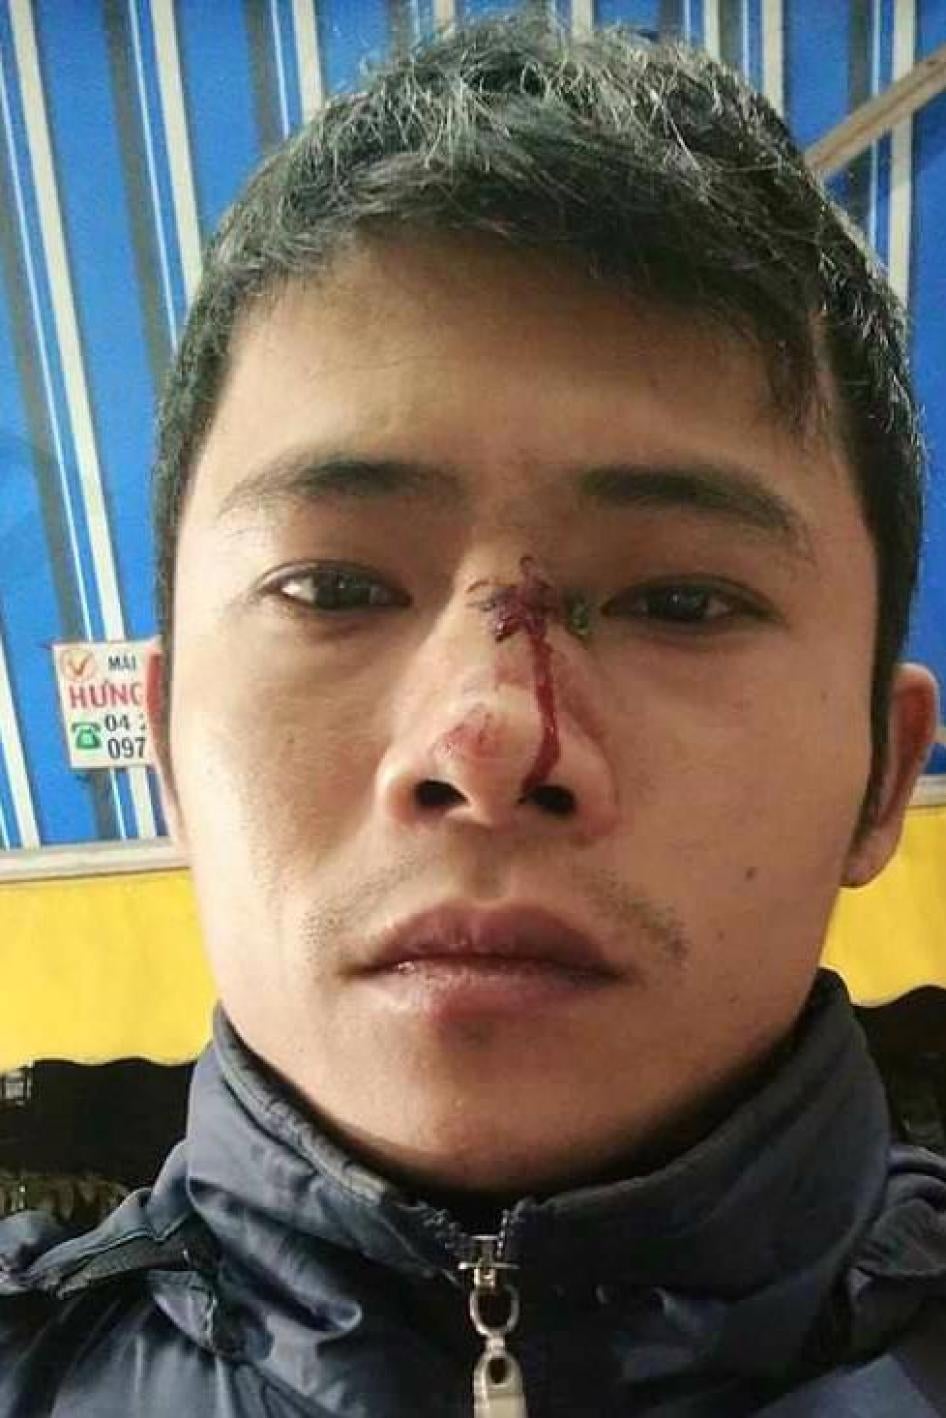 Dinh Hong Quyen after being assaulted in Ha Dong on December 2, 2016.